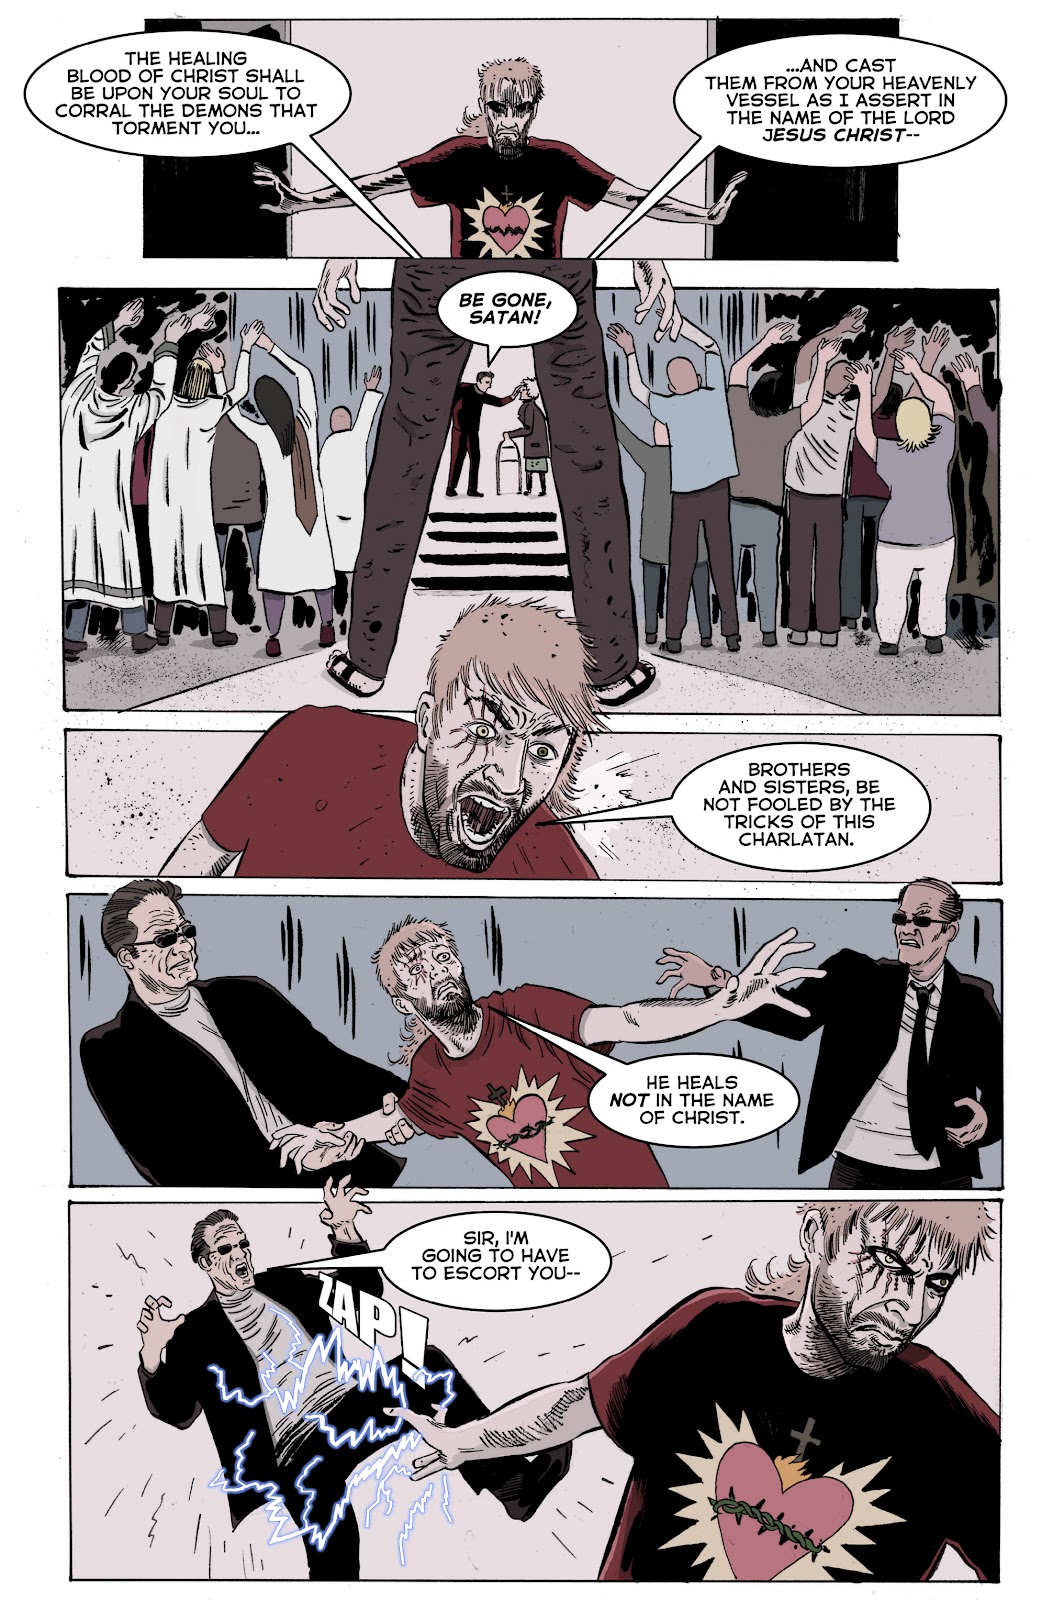 The Rise of the Antichrist issue 8 - Page 9